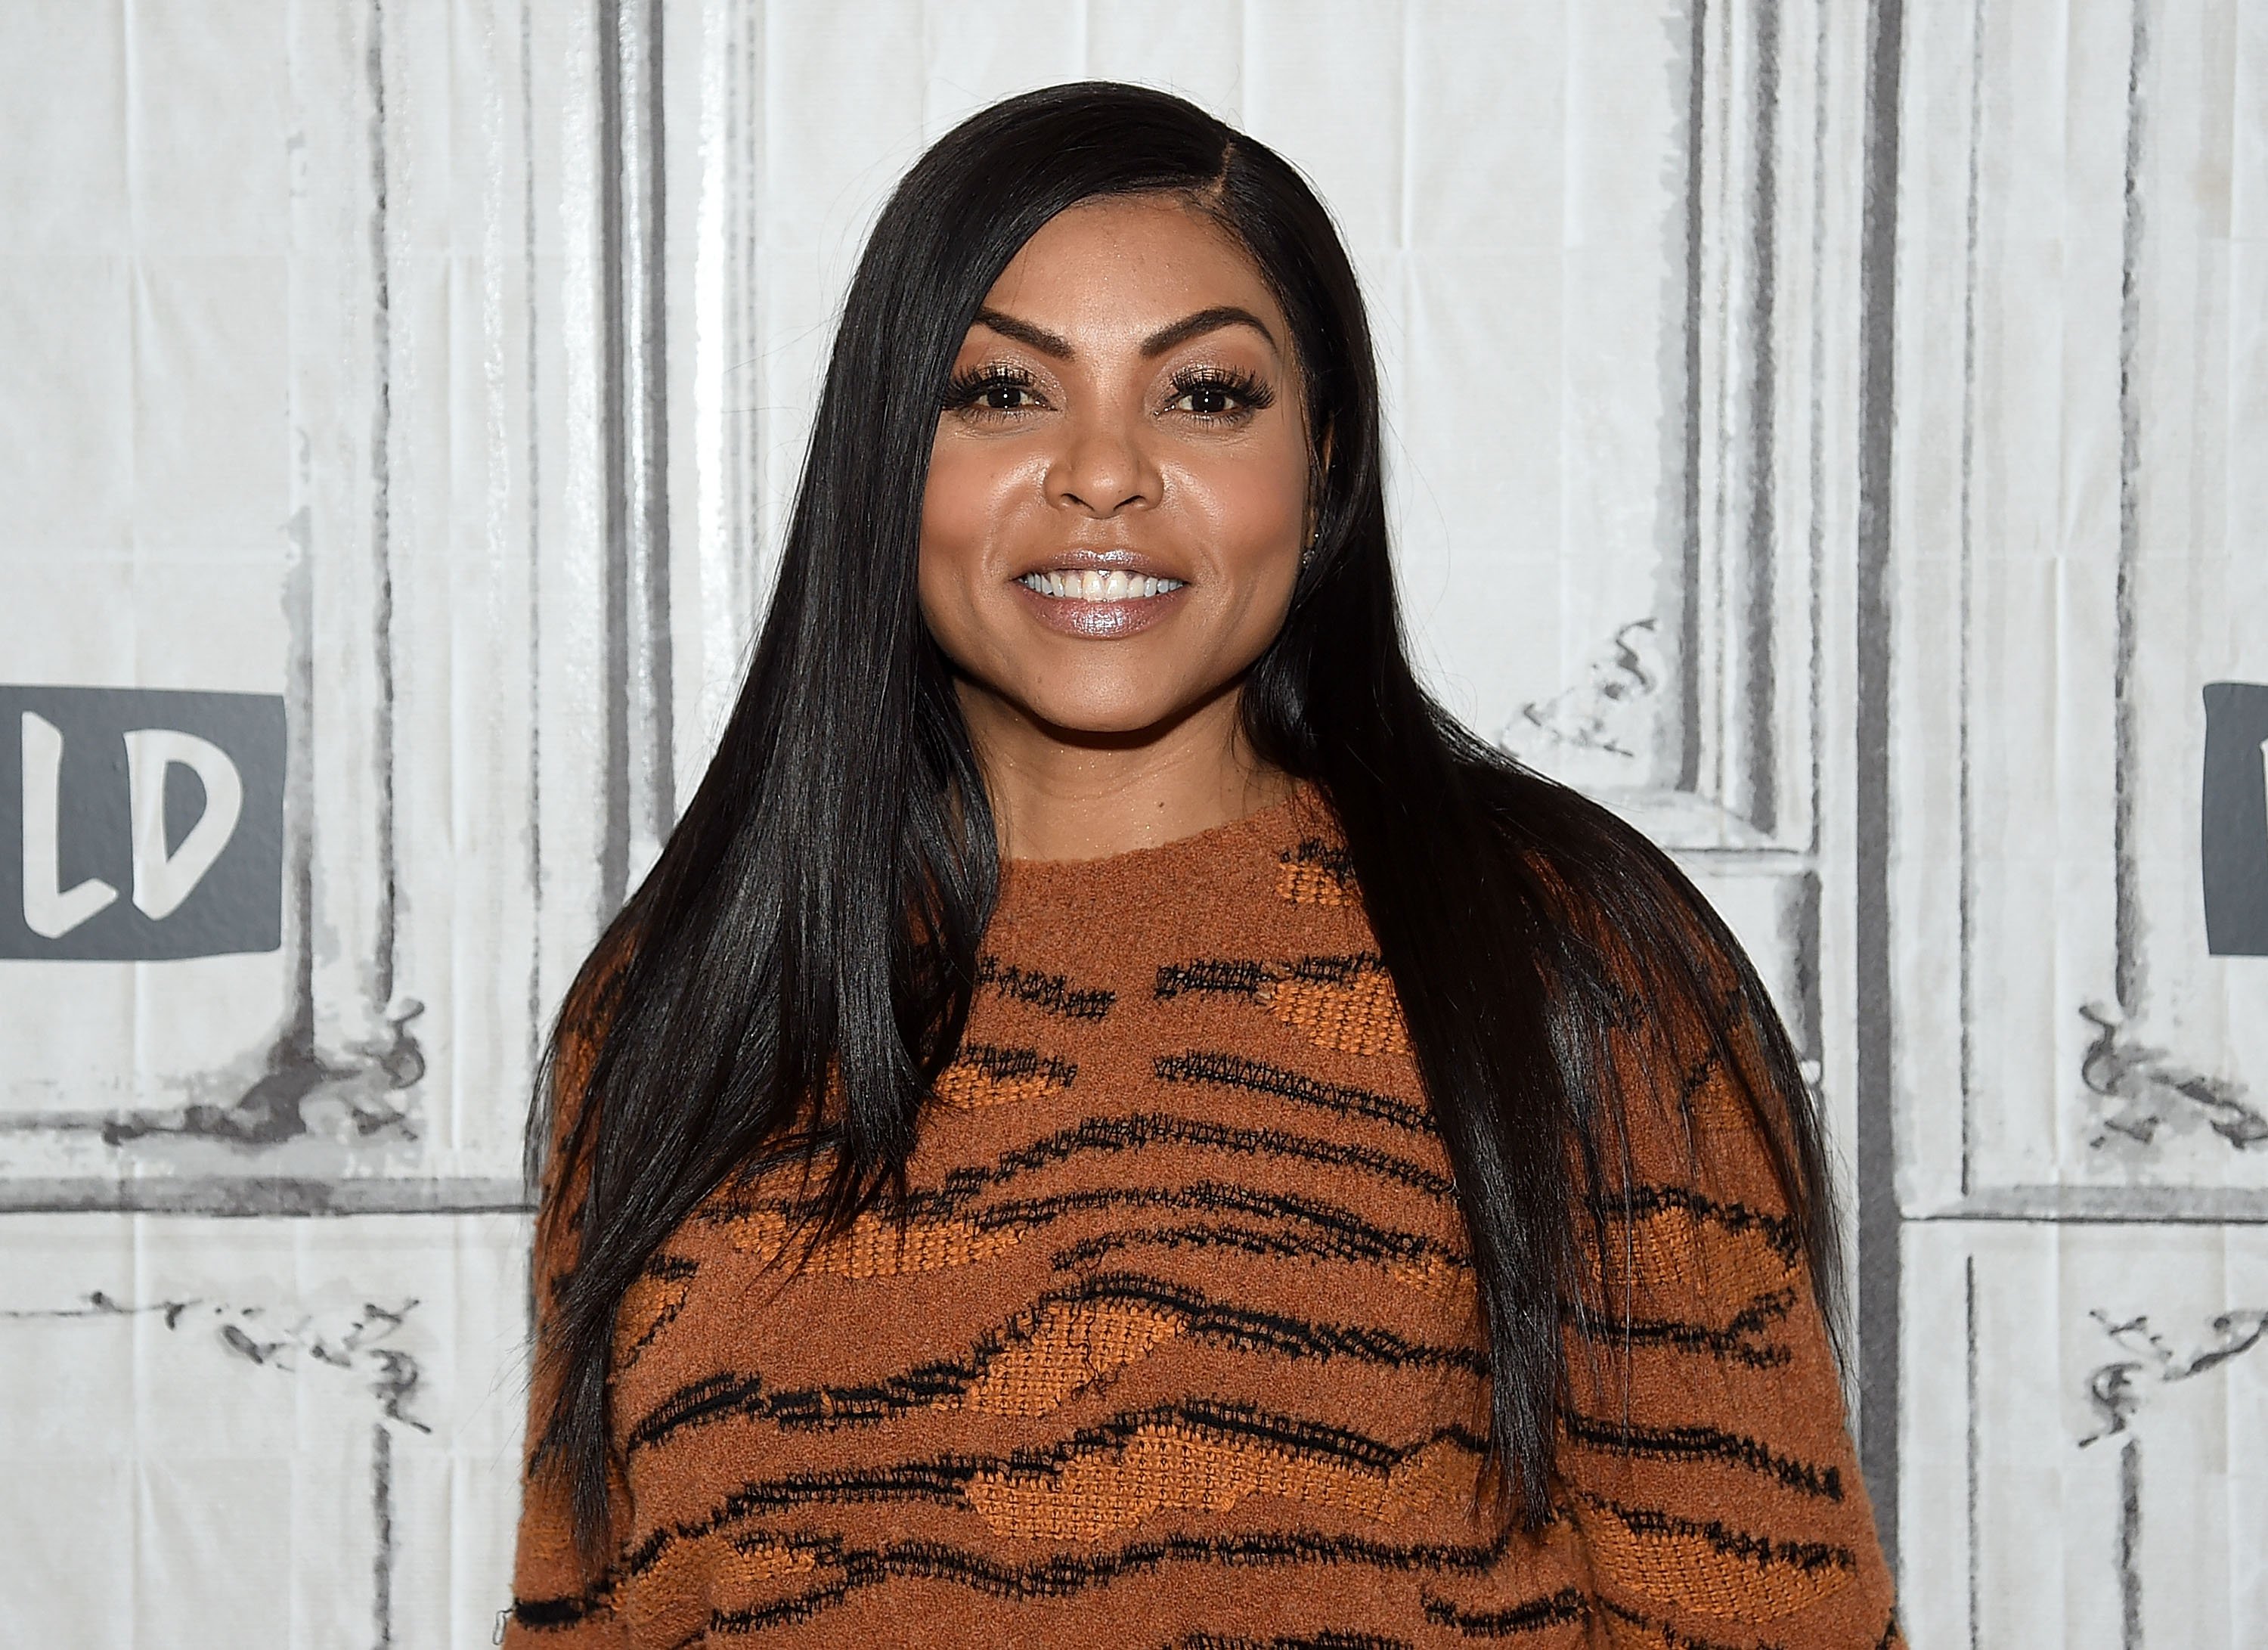 Taraji P. Henson at Build Studio on March 26, 2018 in New York City. | Photo: Getty Images